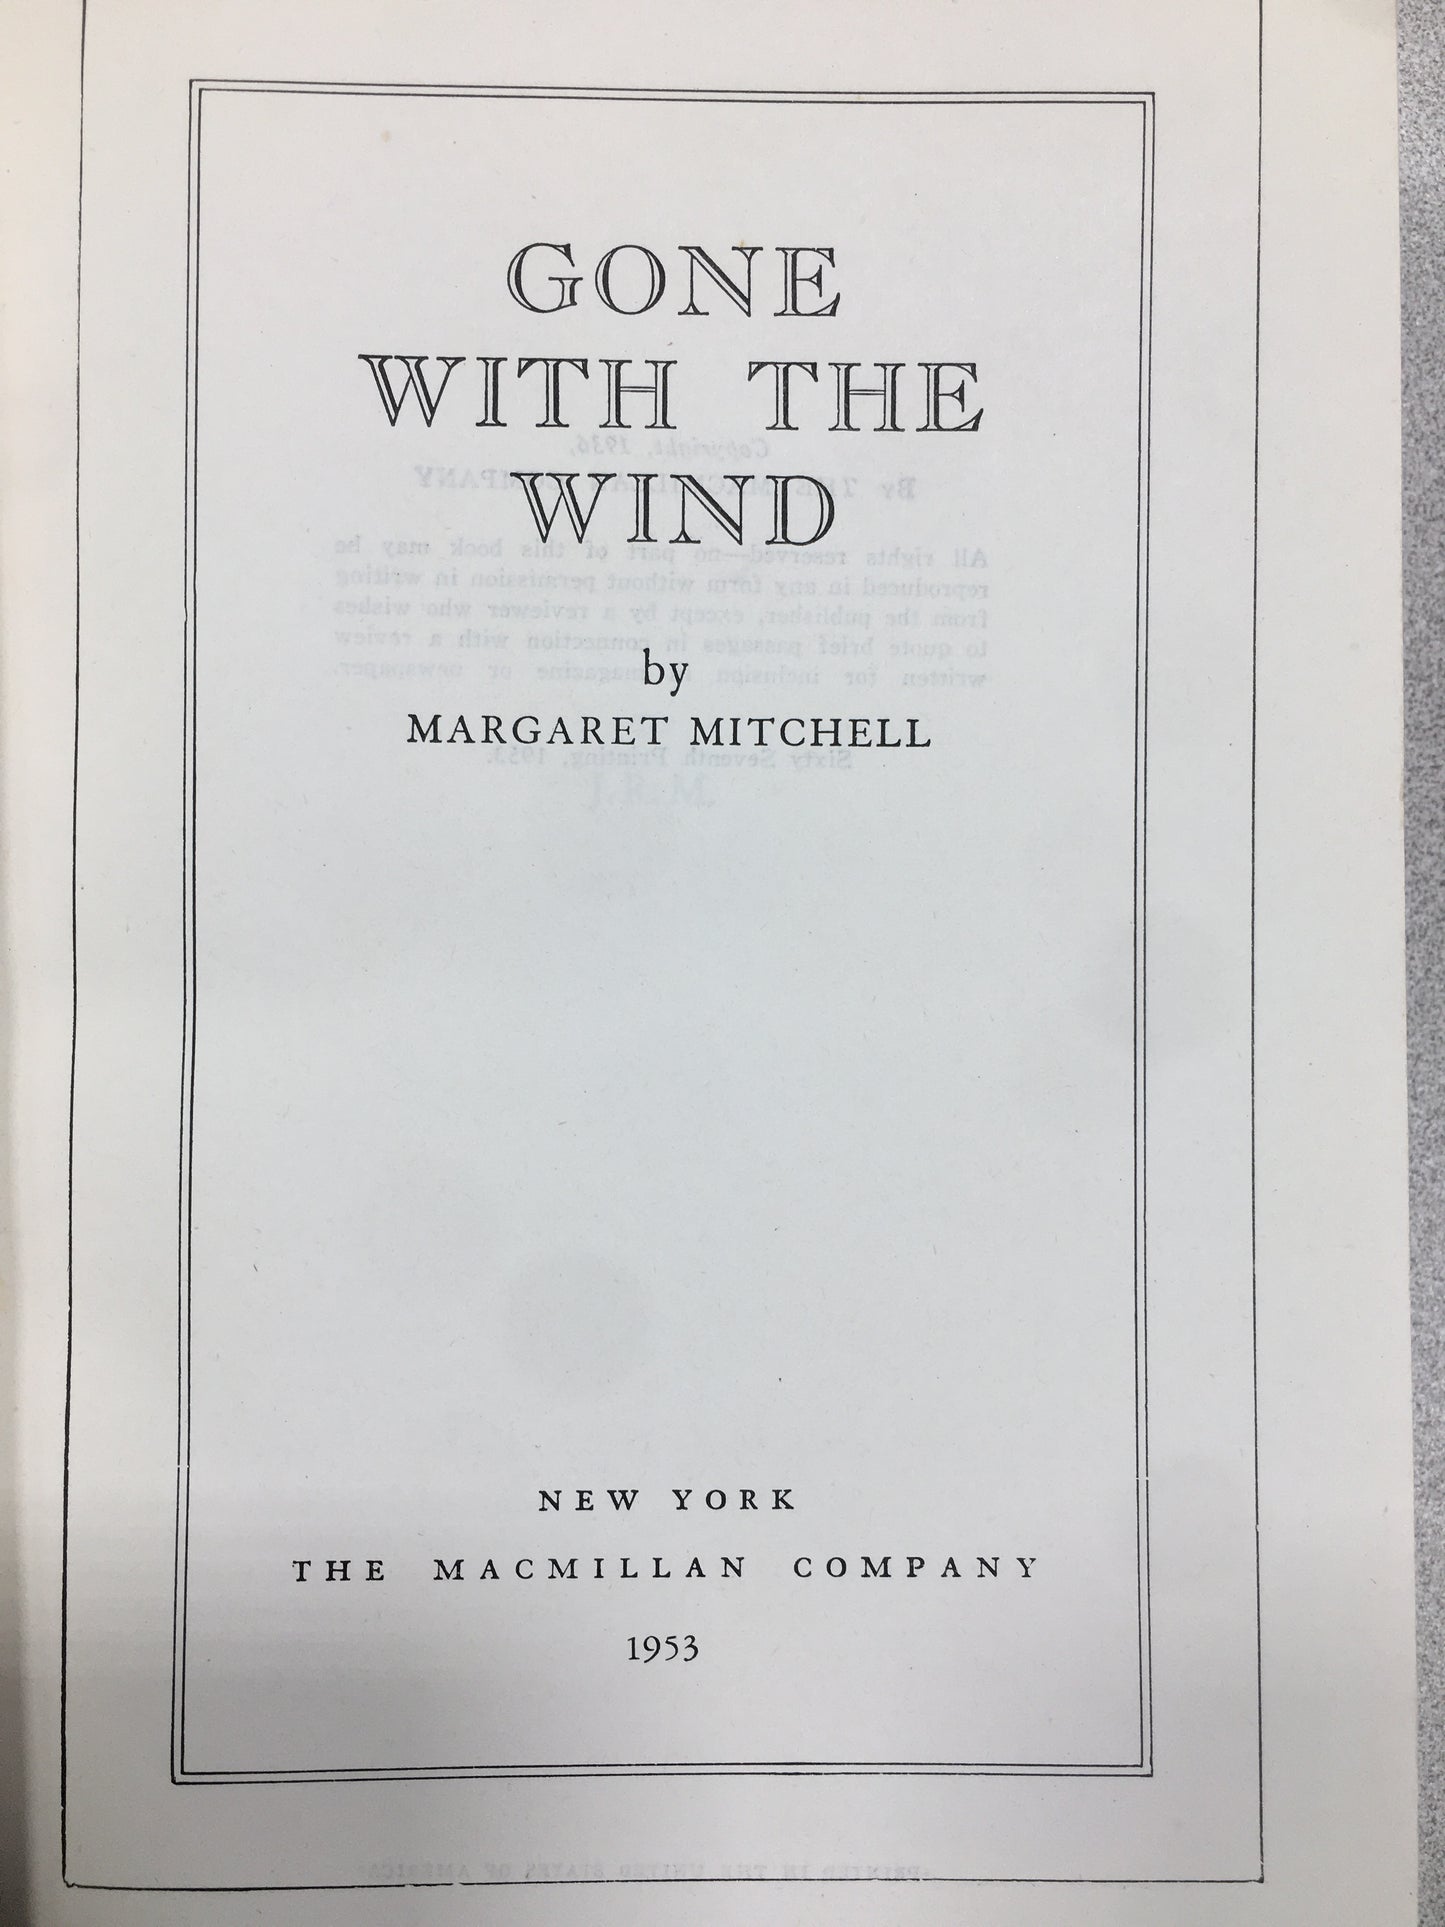 Gone with the Wind by Margaret Mitchell 1953 Hardcover